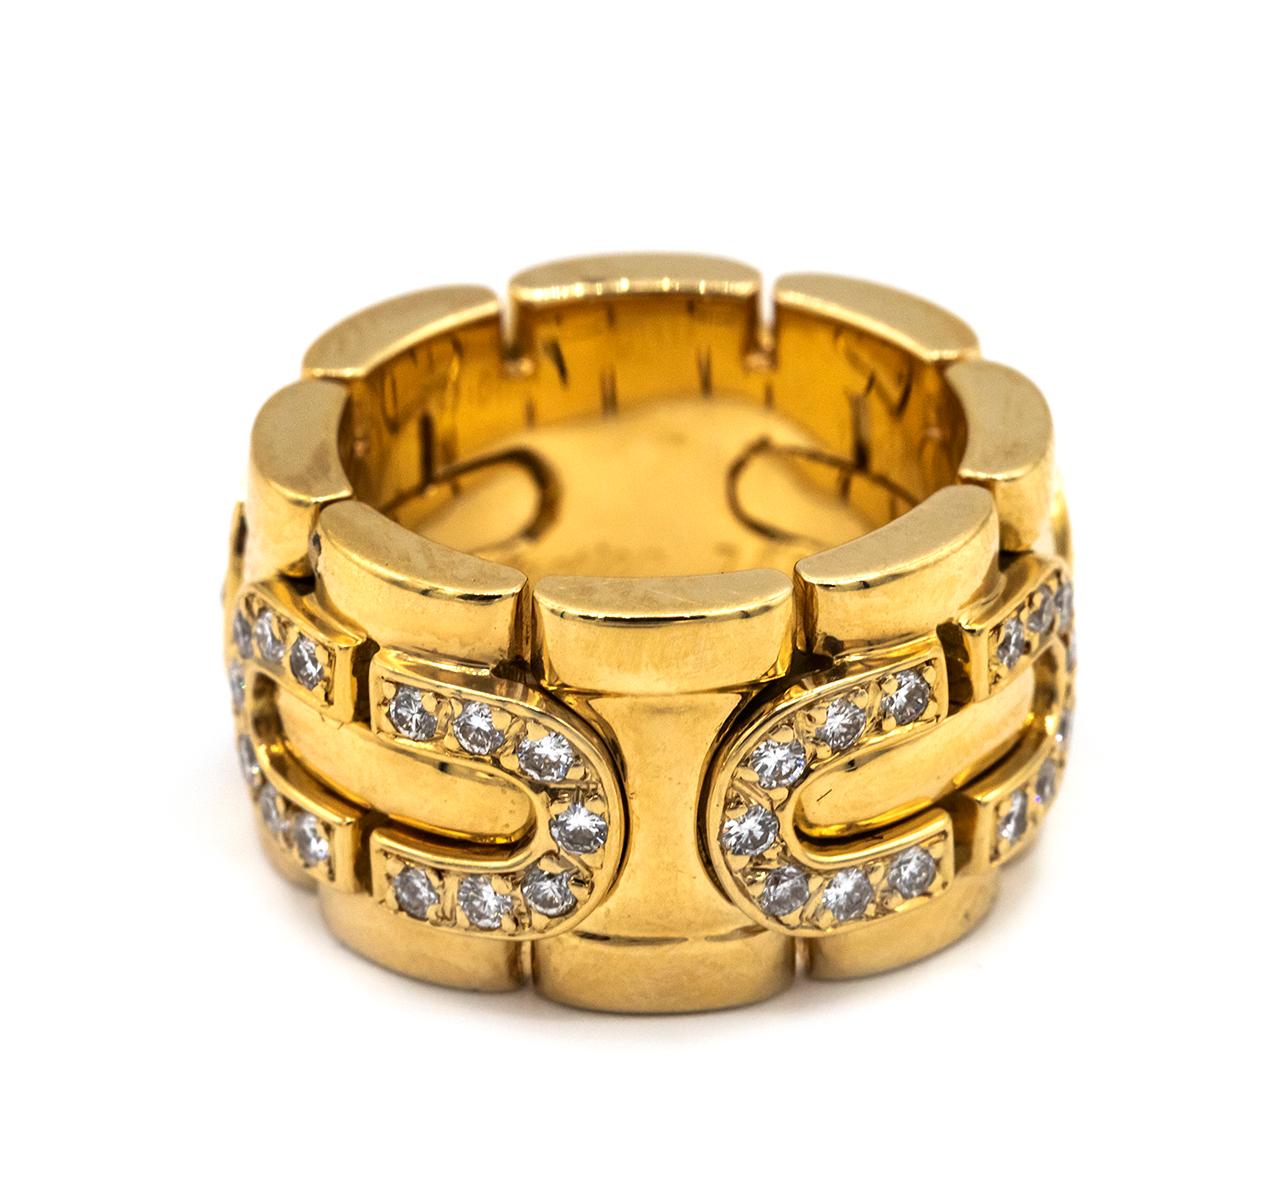 18K yellow gold Cartier link ring with 0.28 carats of round brilliant diamonds. Designer size 47.
Size: 4.5
Metal Type: 18K Yellow Gold
Hallmark: 750, Designer Signature, Maker's Mark, Serial Number, Size, Date
Location: Inside Shank
Metal Finish: